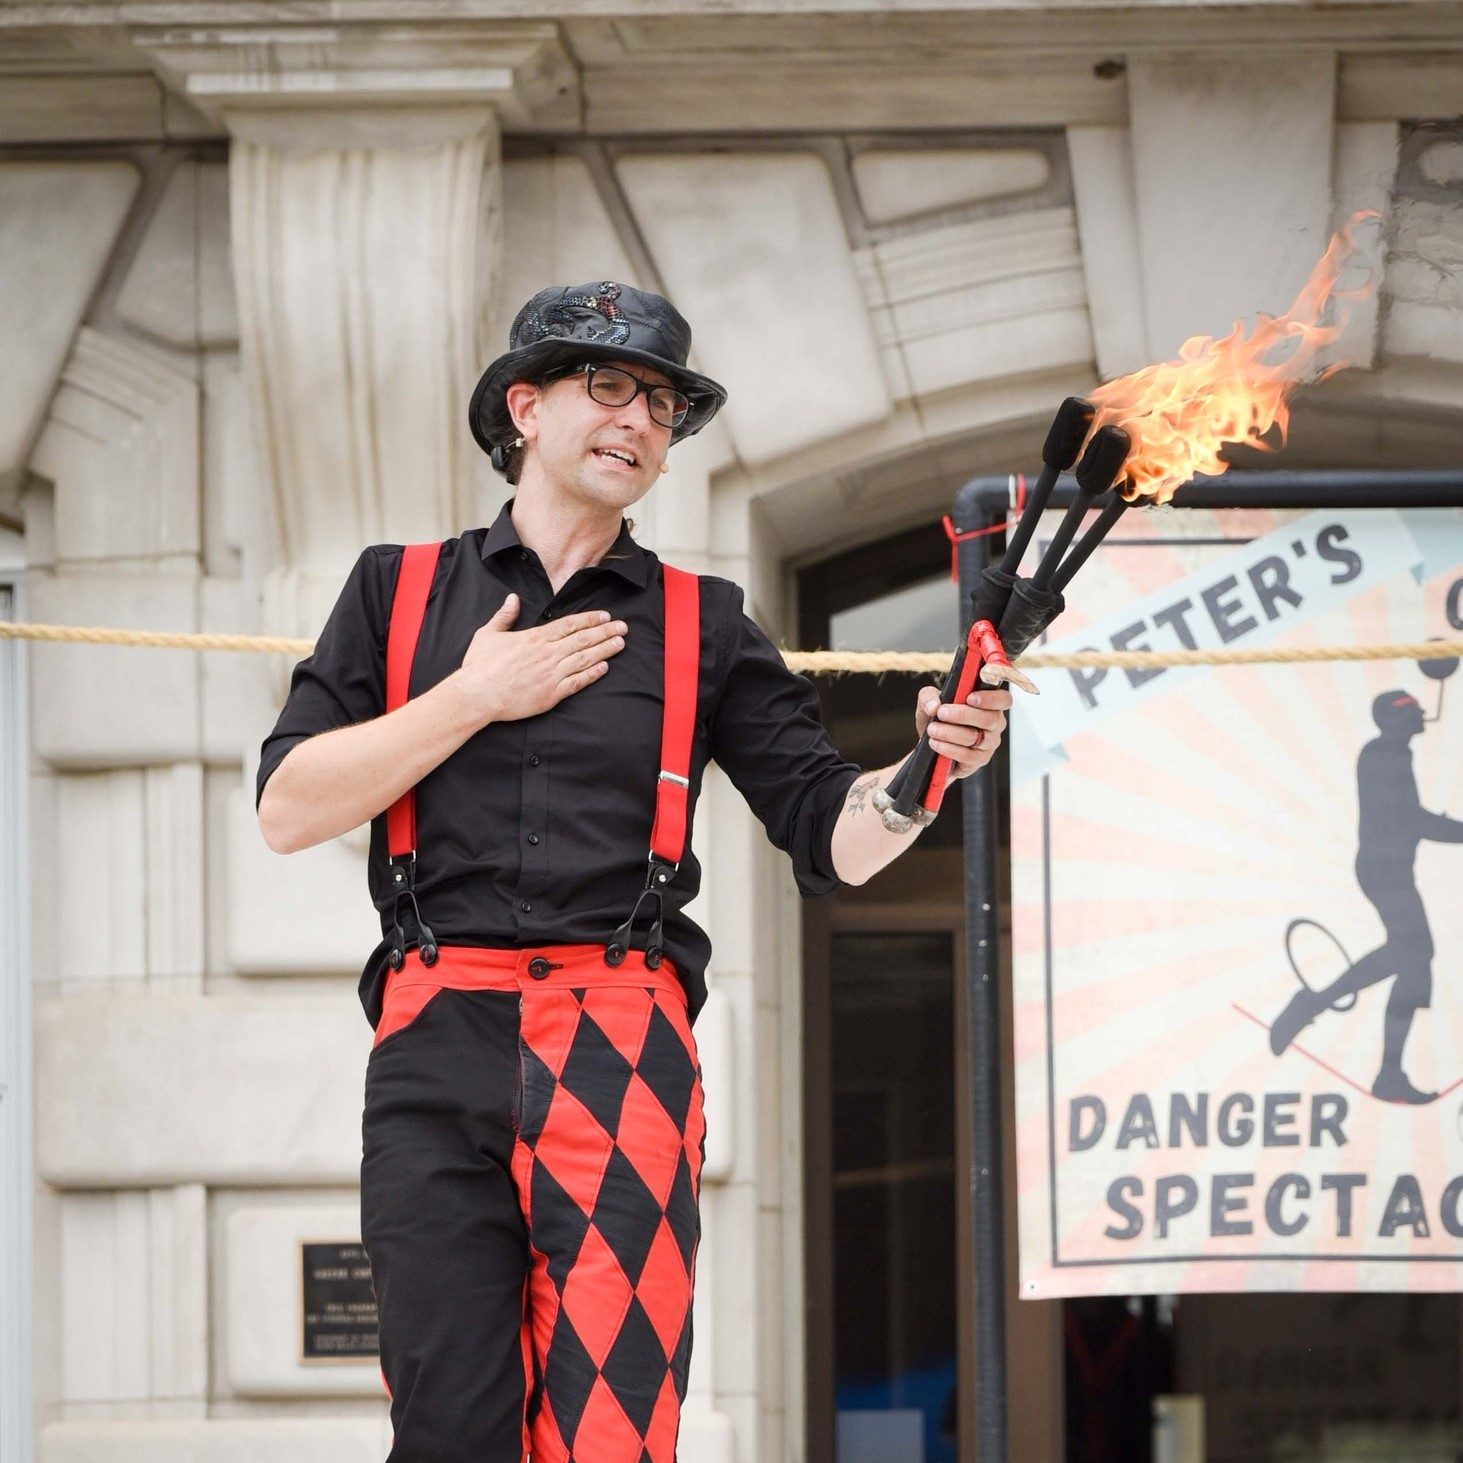 Peter Brunette - Juggler holding fire at the end of a show